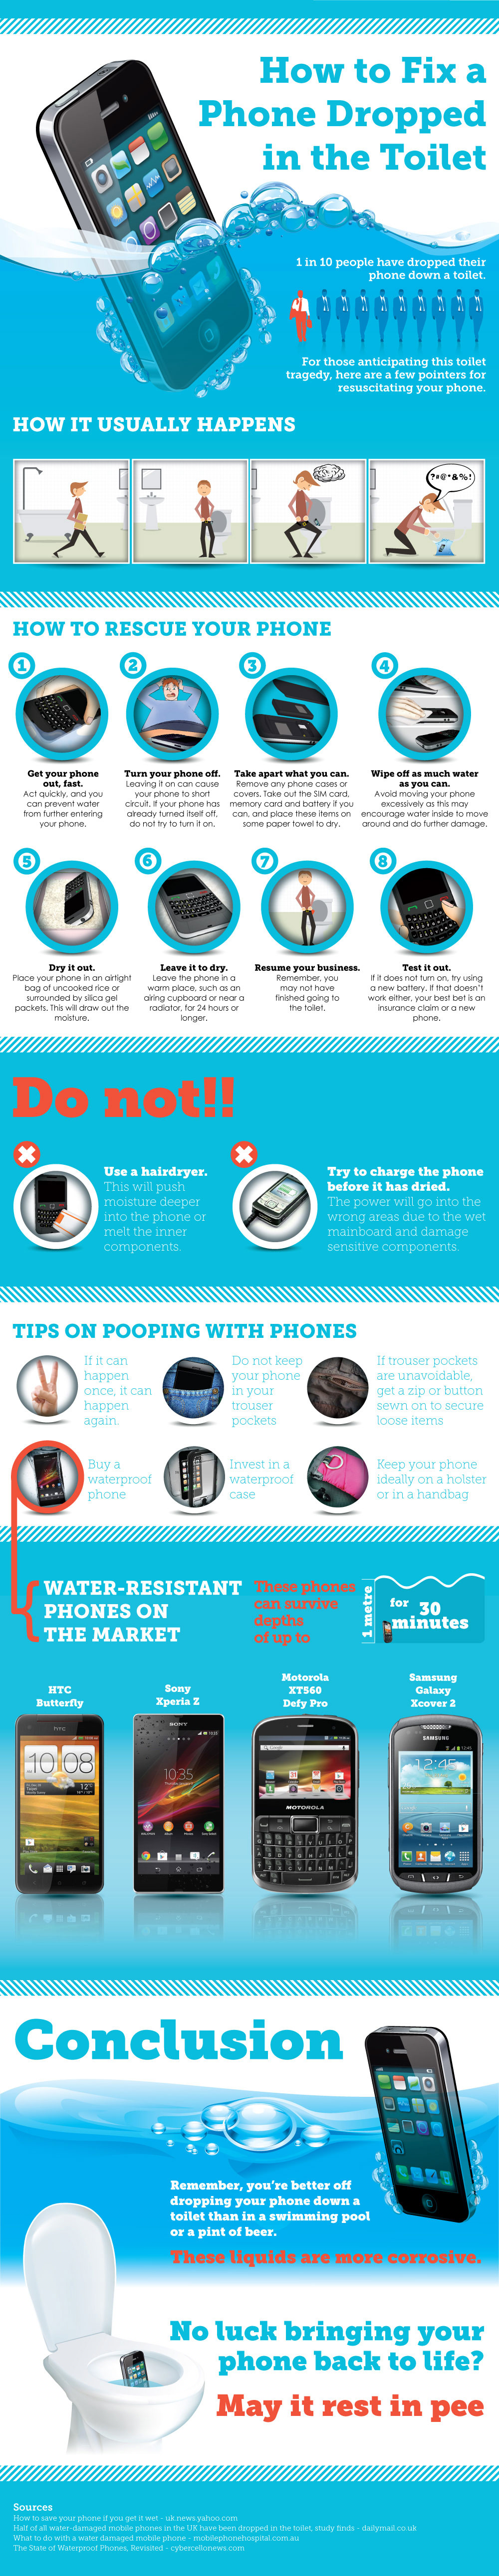 How to Fix a Phone Dropped in the Toilet